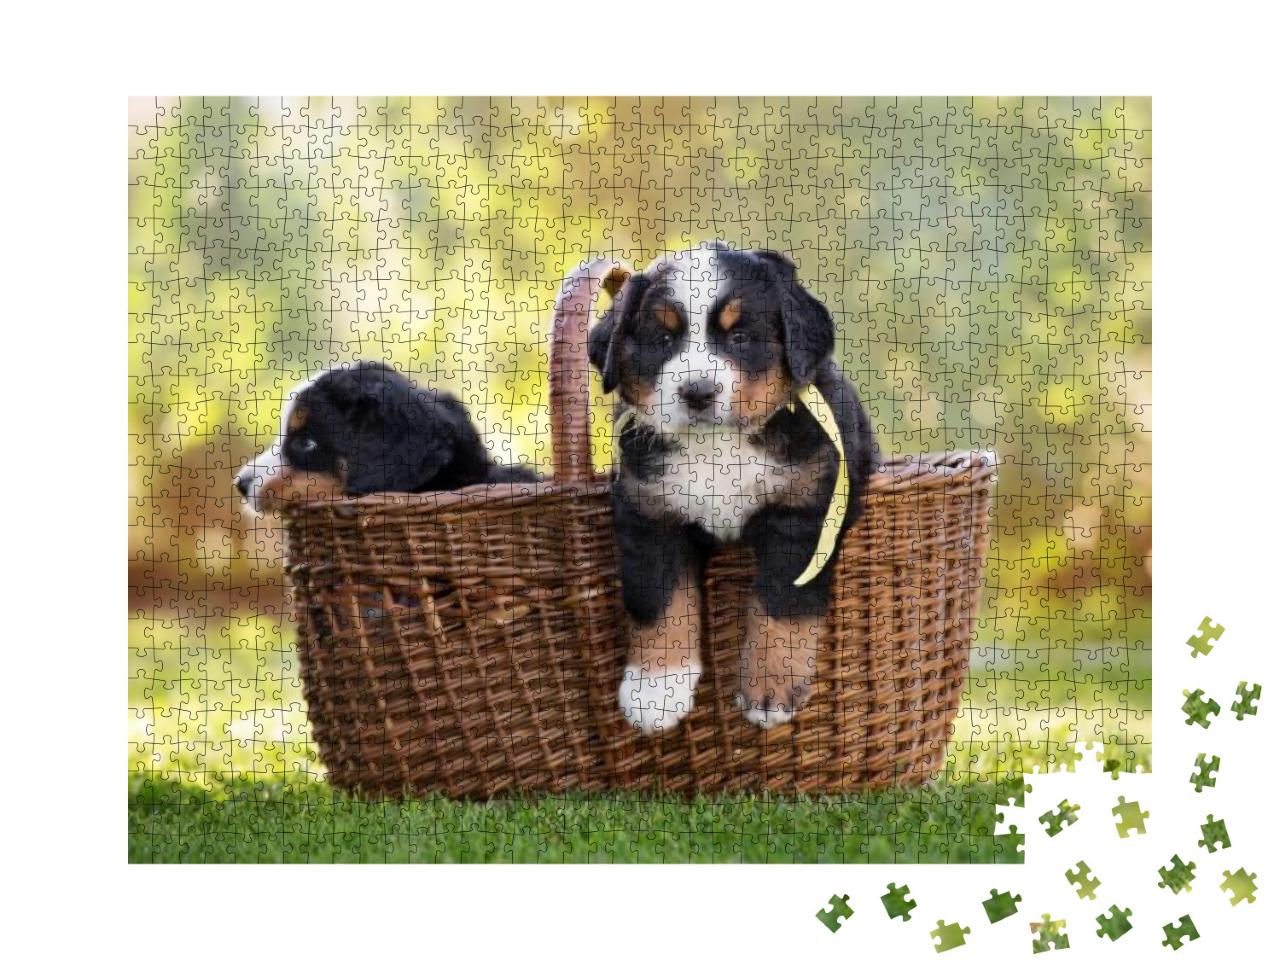 Bernese Mountain Puppy in a Basket Outdoors... Jigsaw Puzzle with 1000 pieces